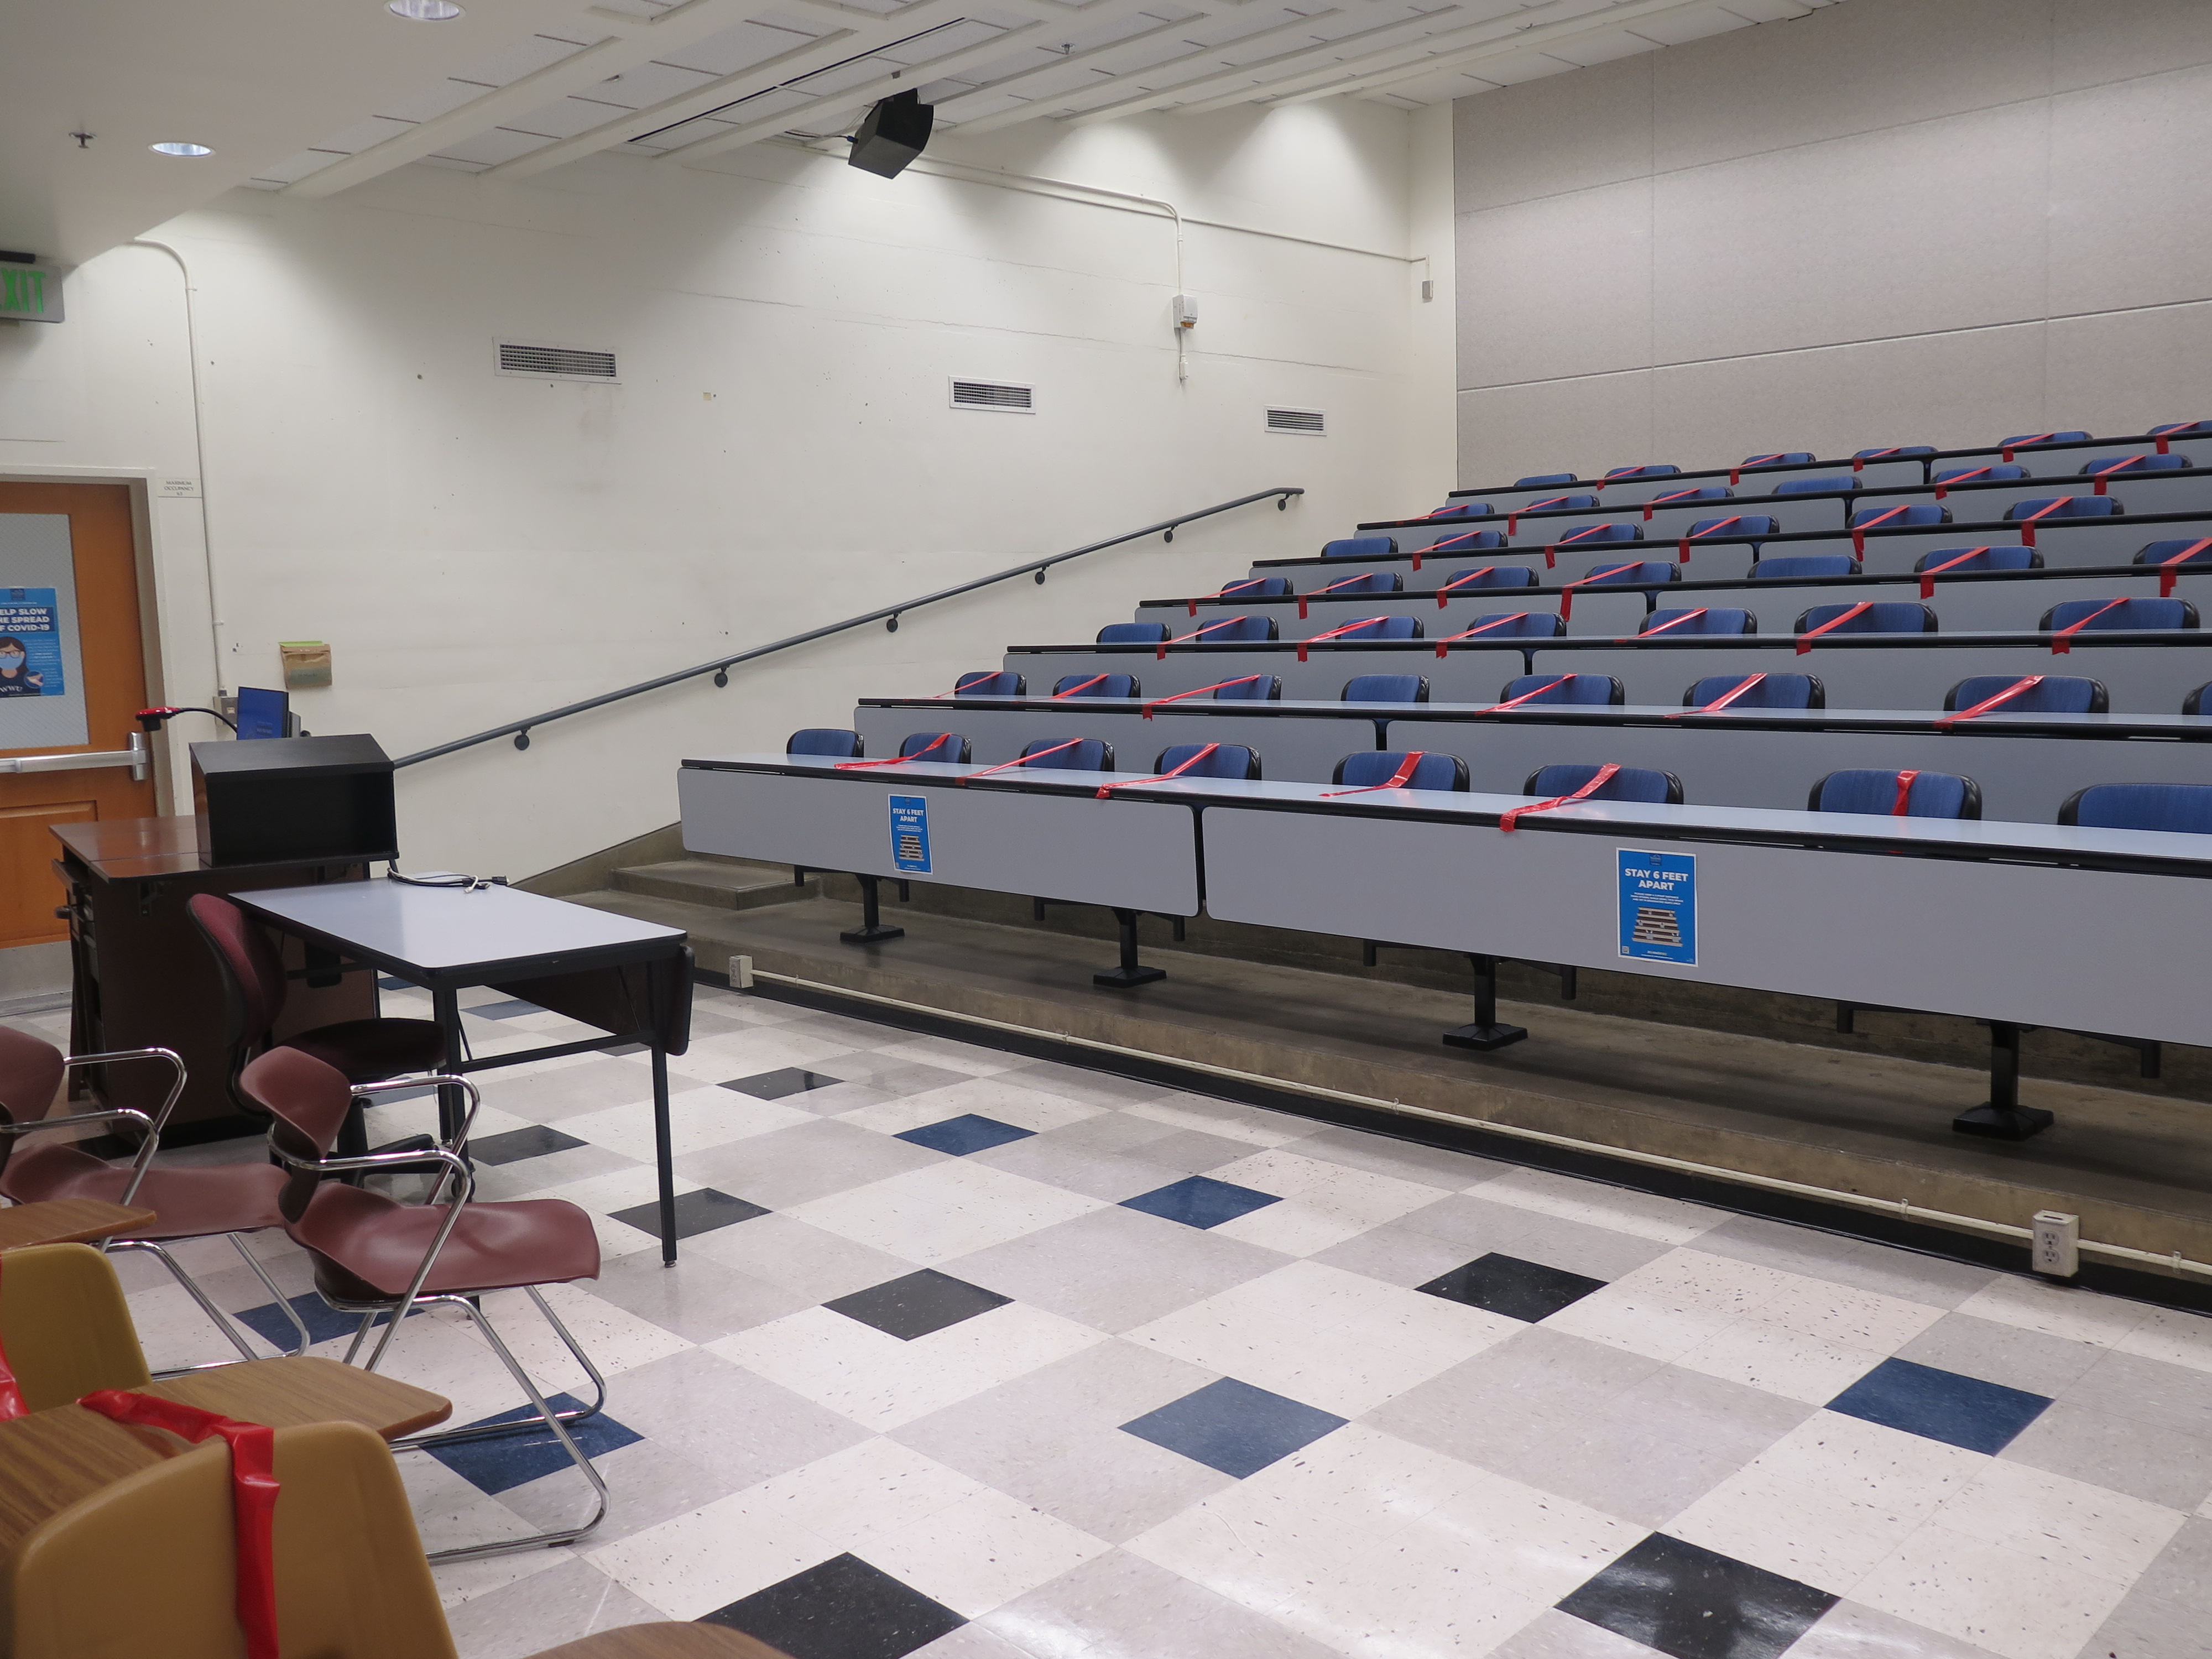 Room Consists of hard floors, Stationary rows of tables and chairs, a podium and whiteboard are located at the front of the room. This room uses a Rear Screen projector, it is the large Gray surface next to the white board